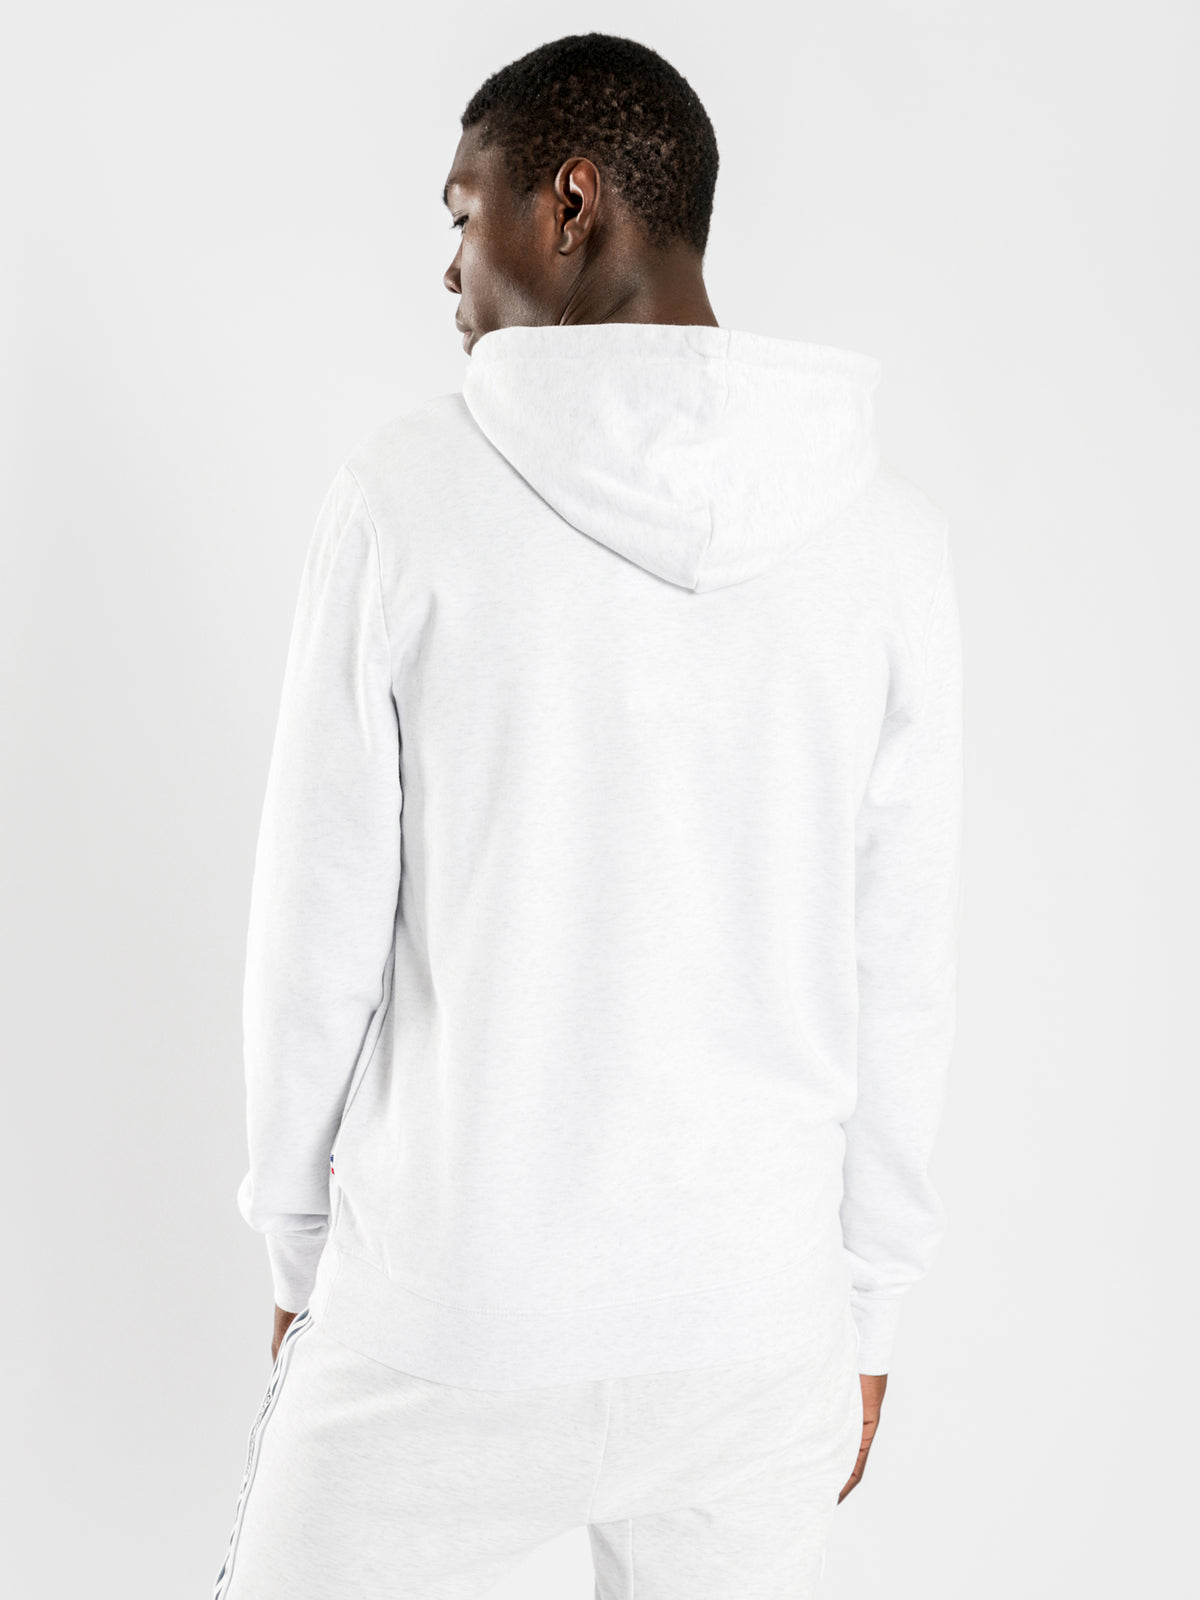 Labrit Hooded Sweater in Snow Marle